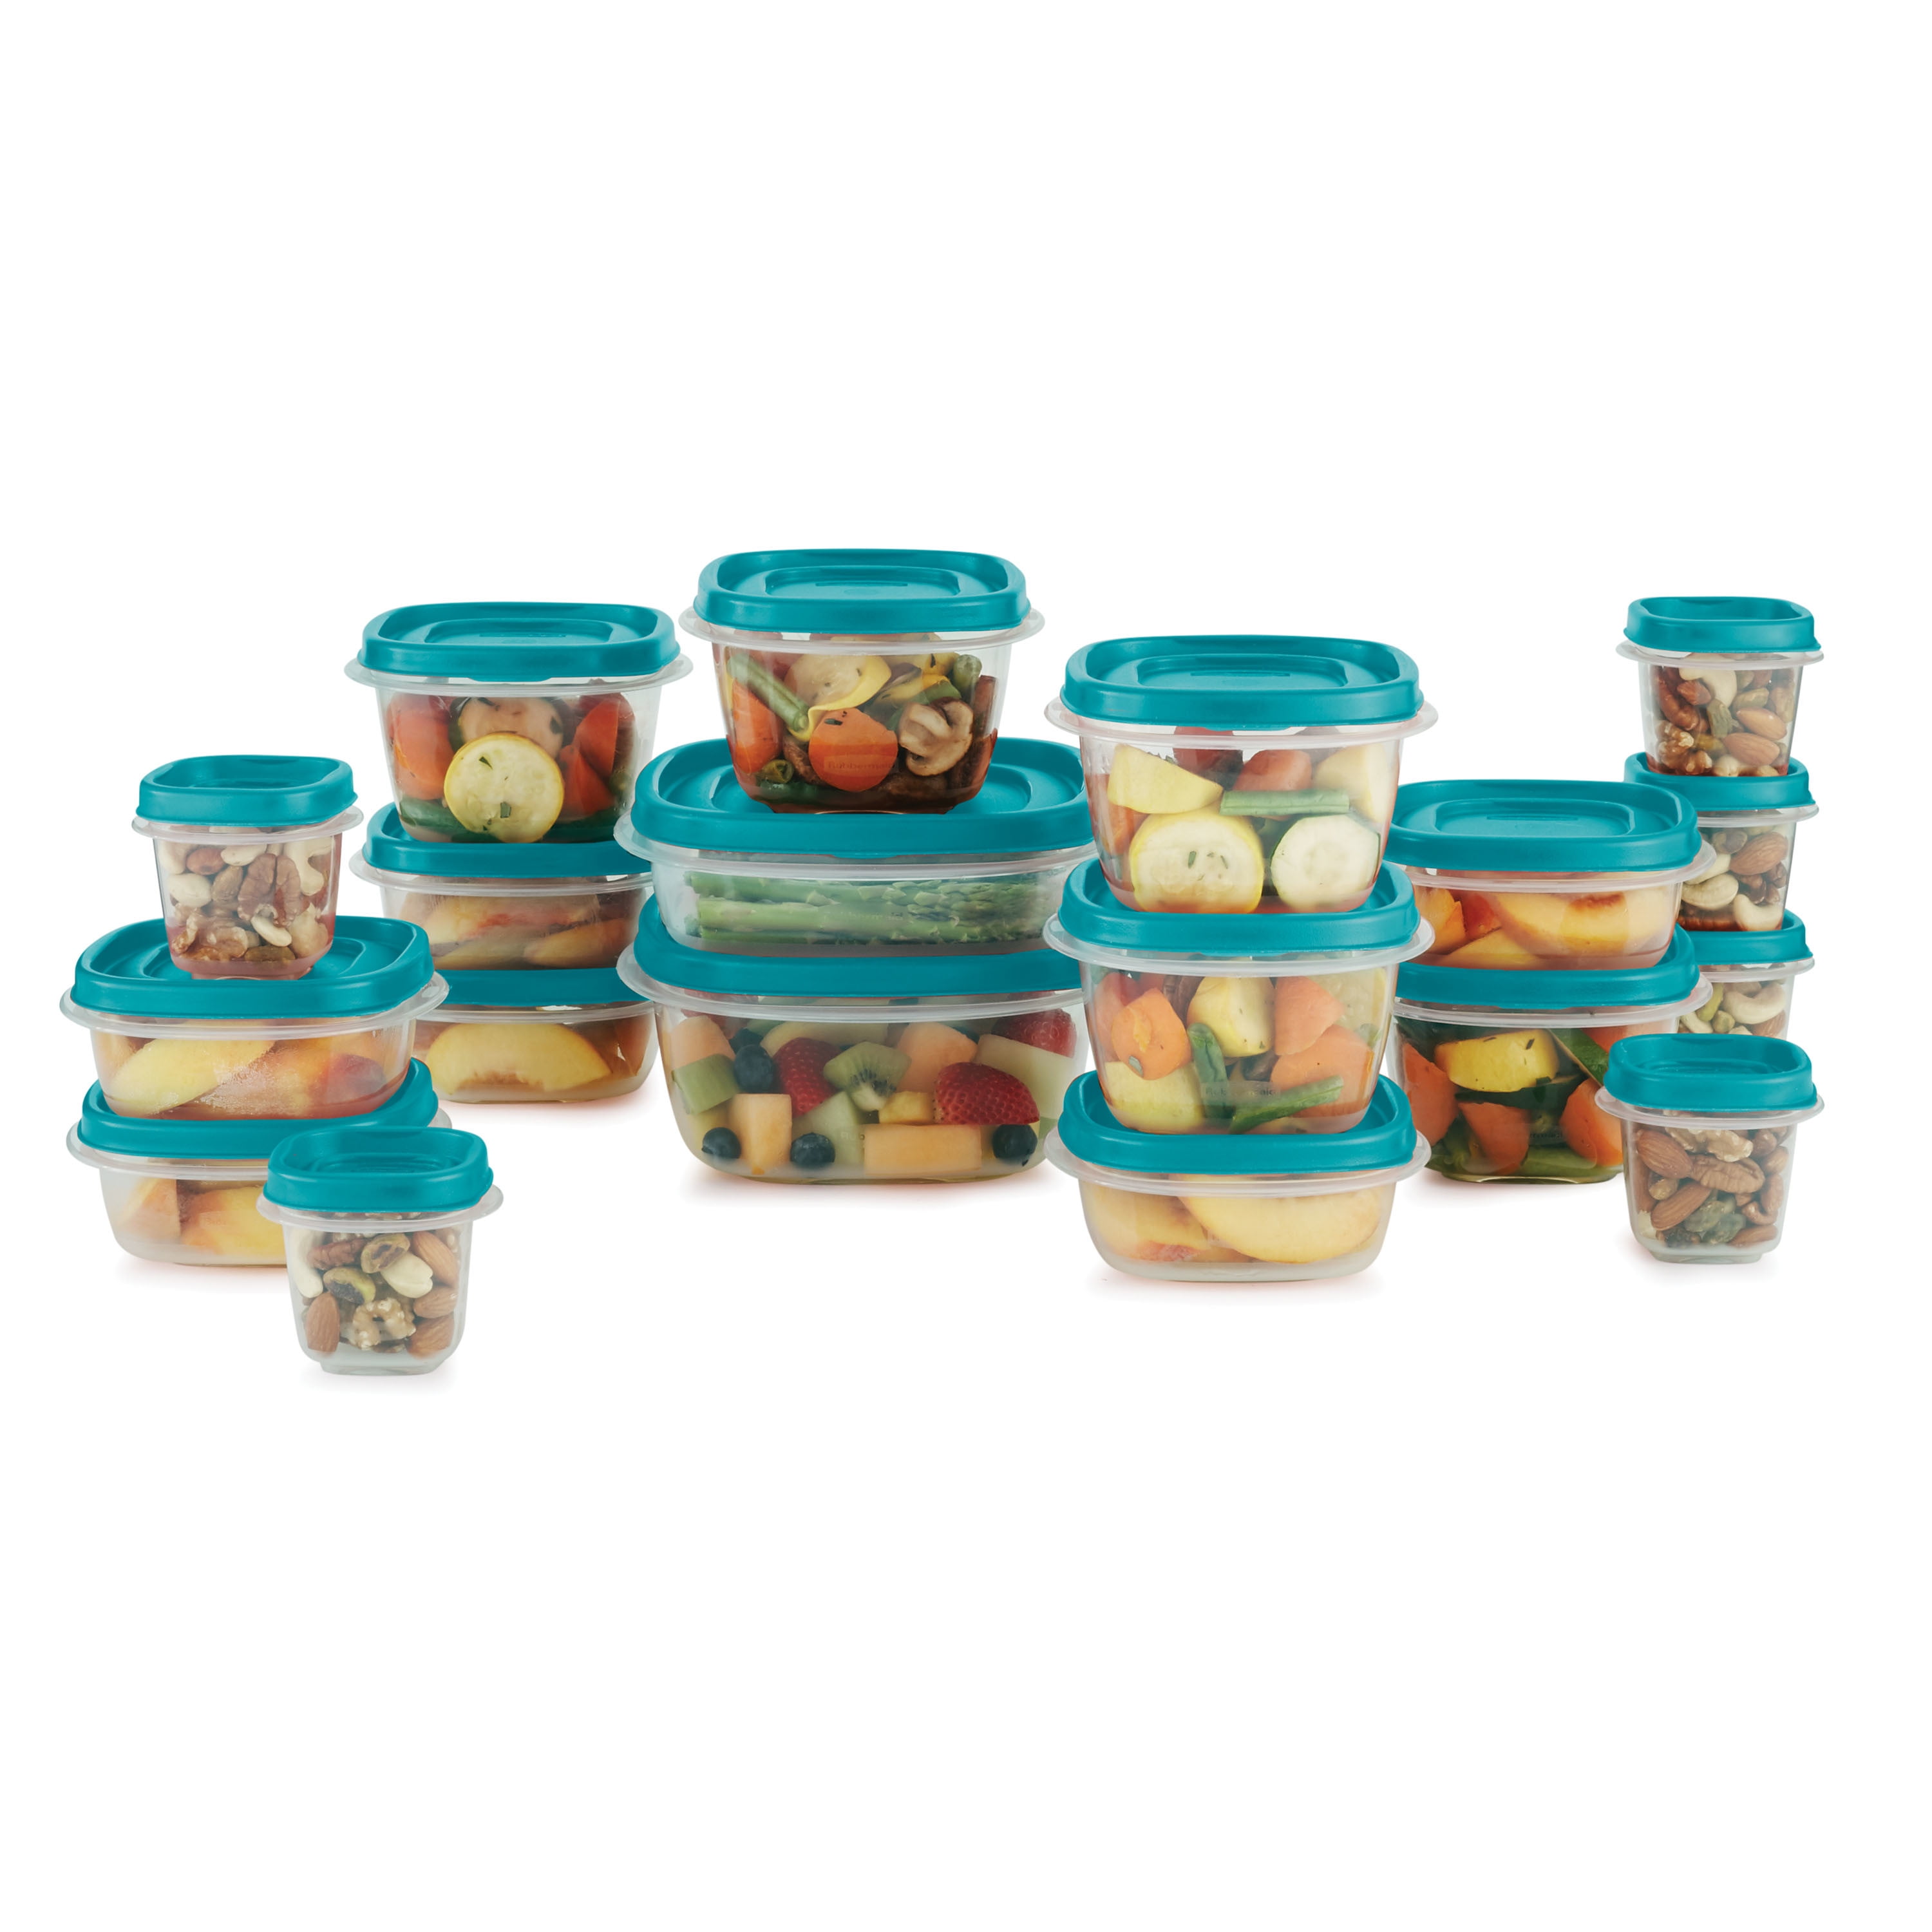 Rubbermaid Food Storage 38 Piece Set with Easy Find Lids, Teal